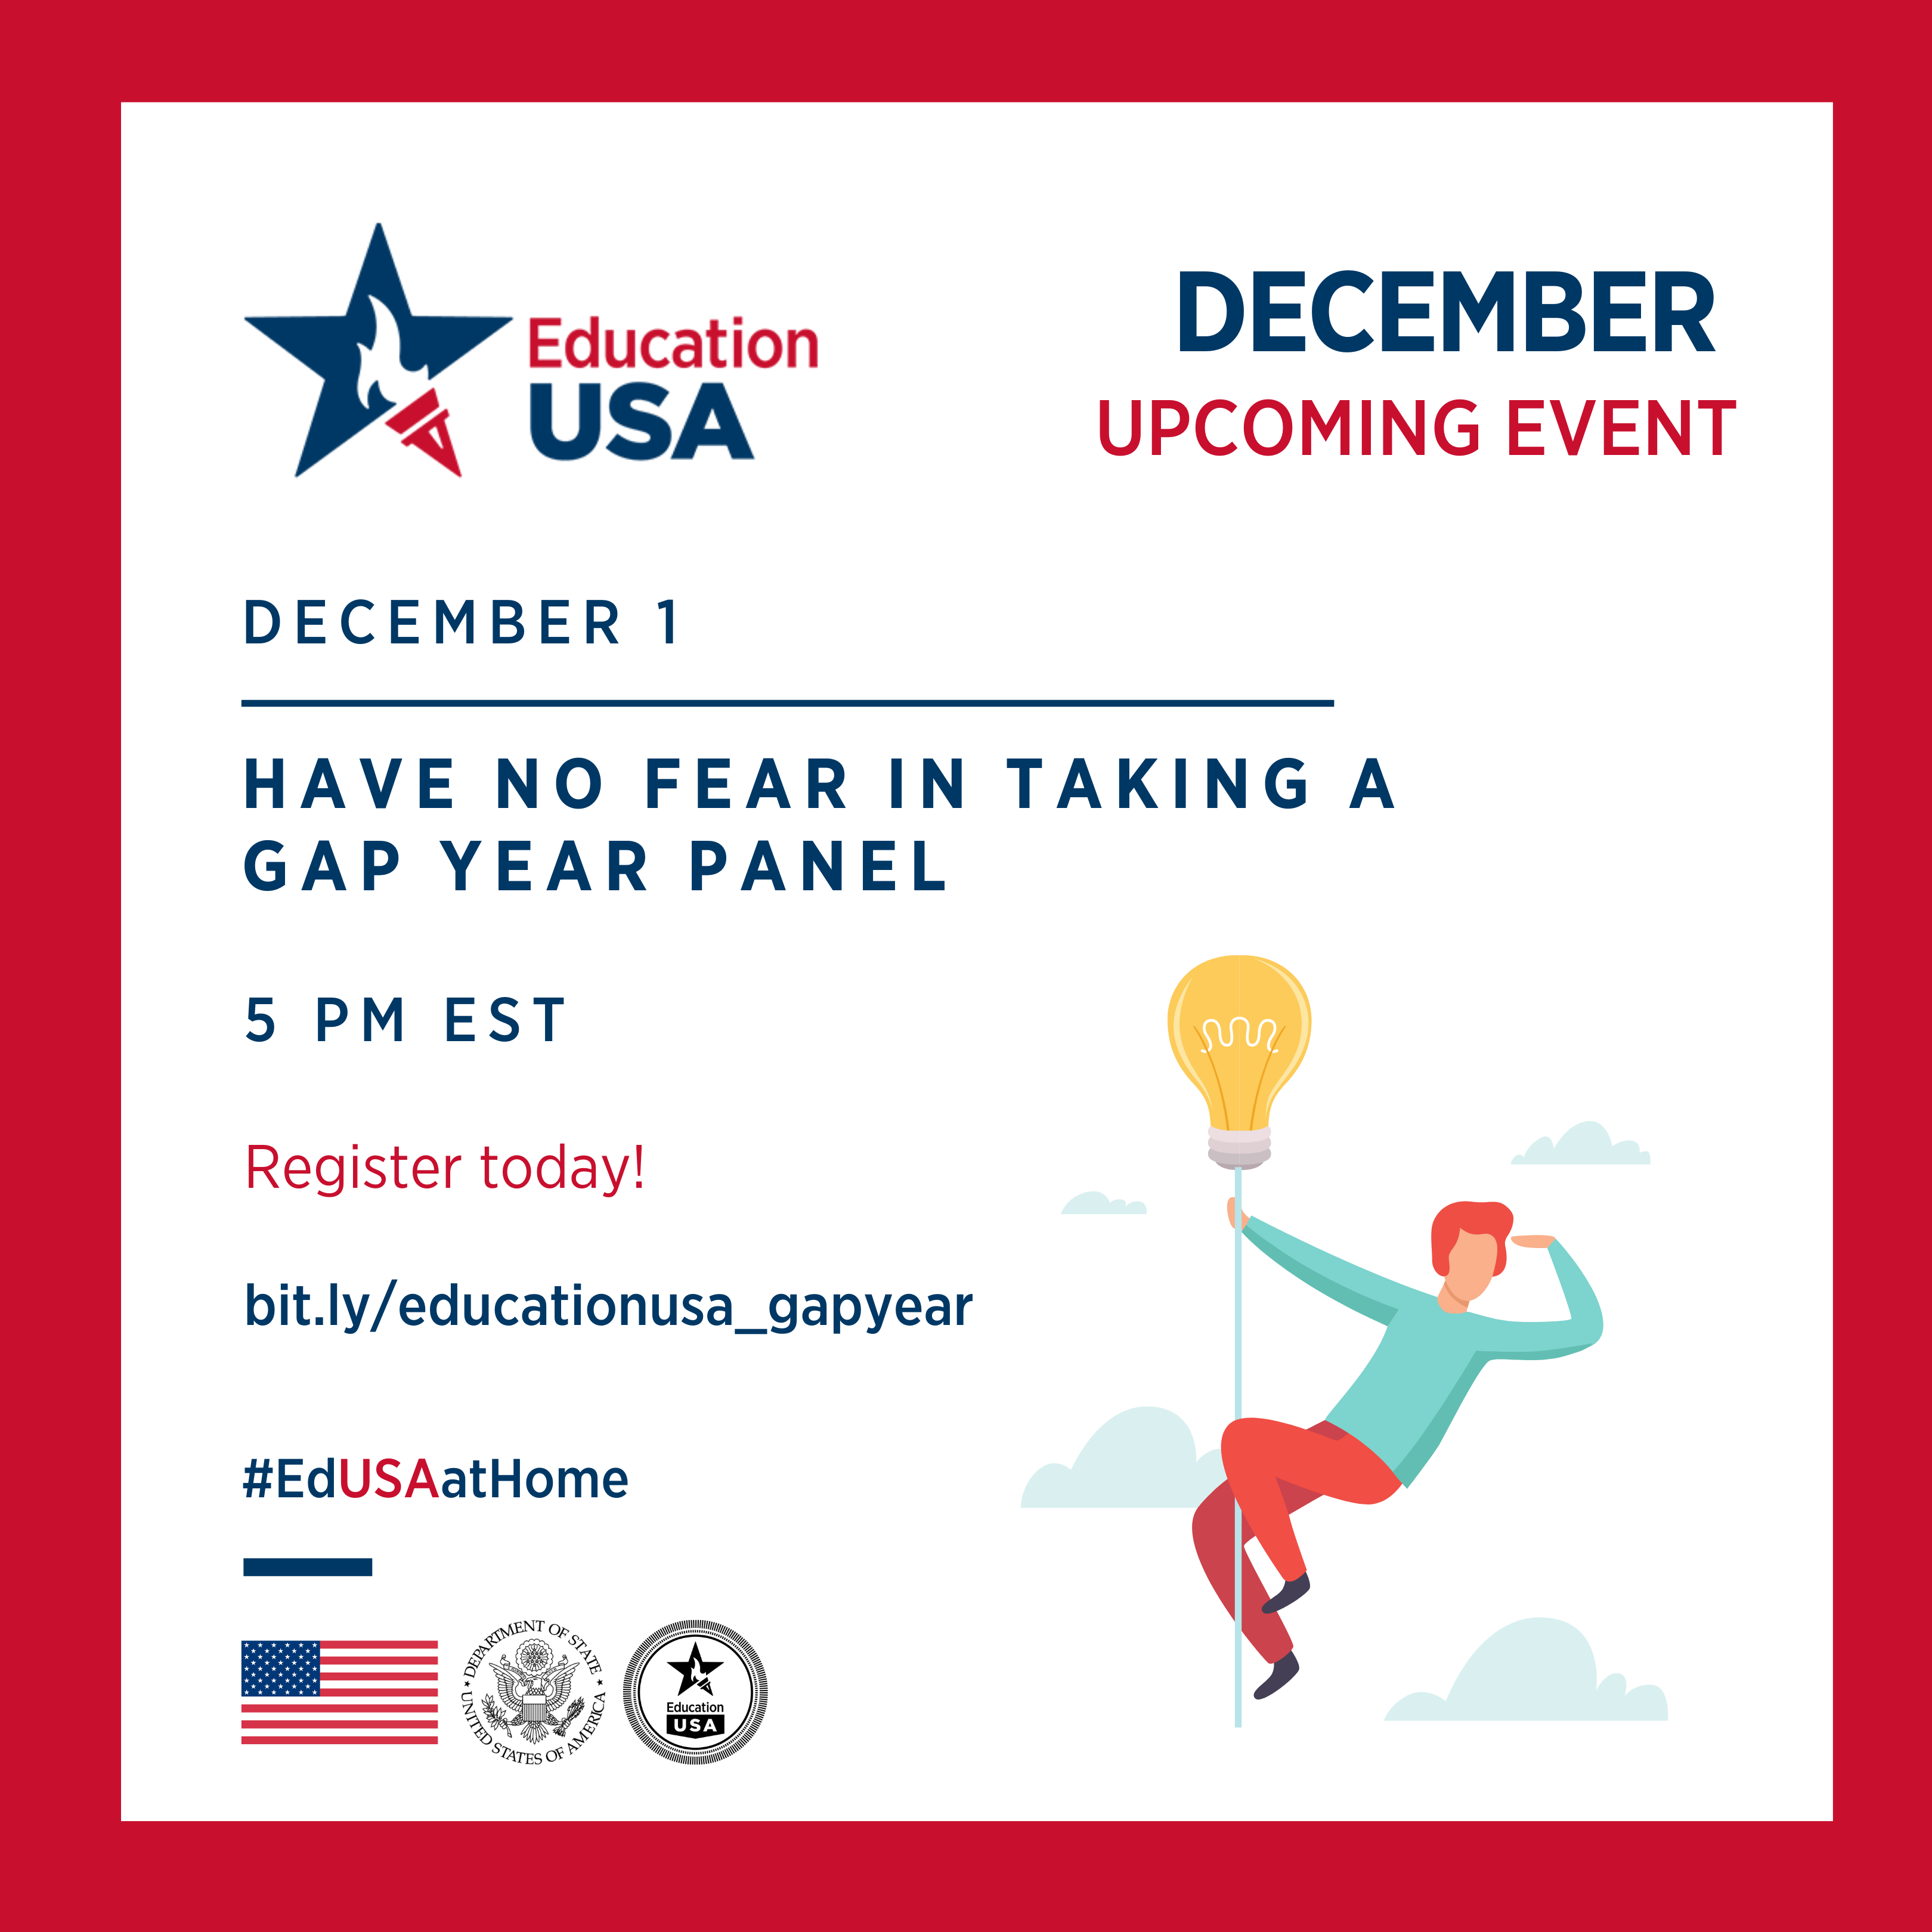 EducationUSA December Upcoming Event. December 1: Have no fear in taking a gap year panel. 5 PM EST. Register today!